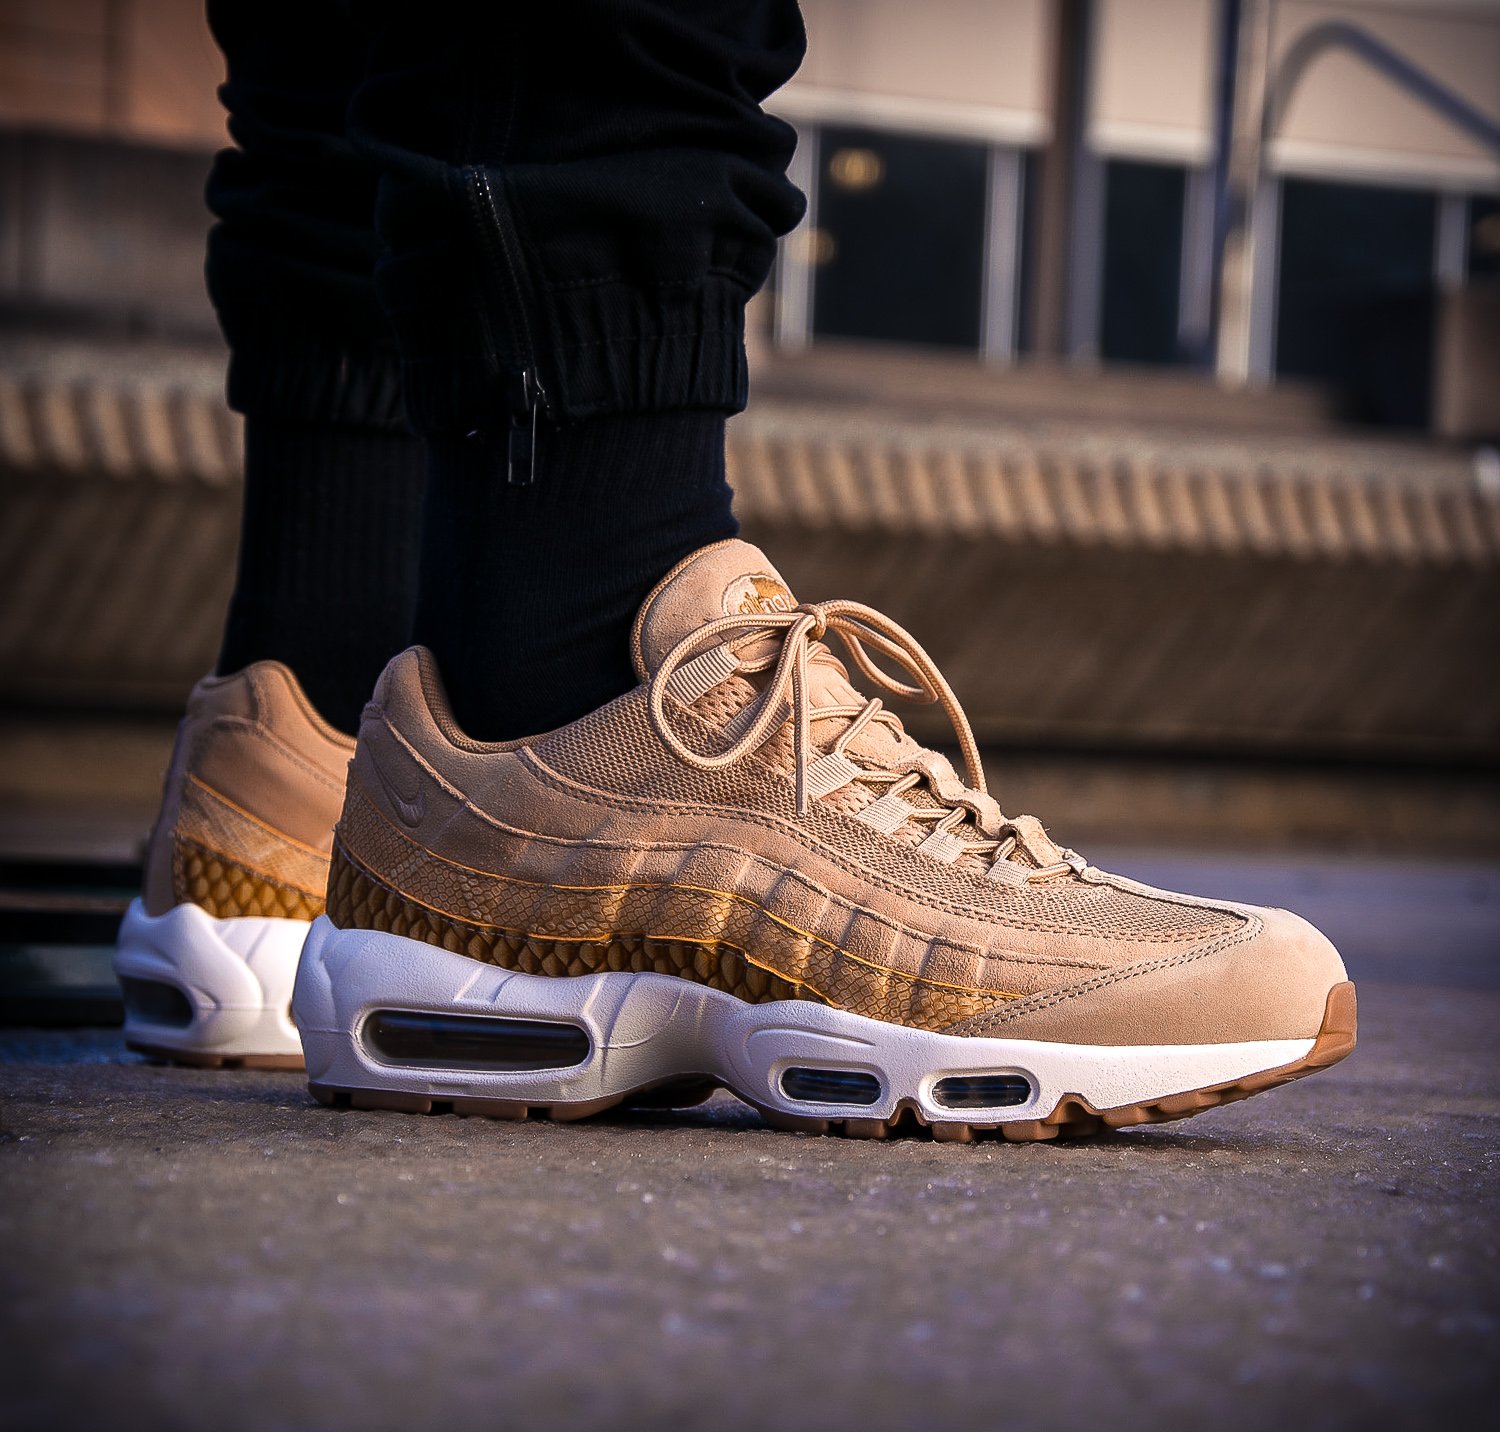 Solekitchen on Twitter: "The latest edition of the #Nike Air Max 95 Premium "Vachetta Tan/Elemental Gold" is fitted with croco overlays and now available instore &amp; online! 41 - 46